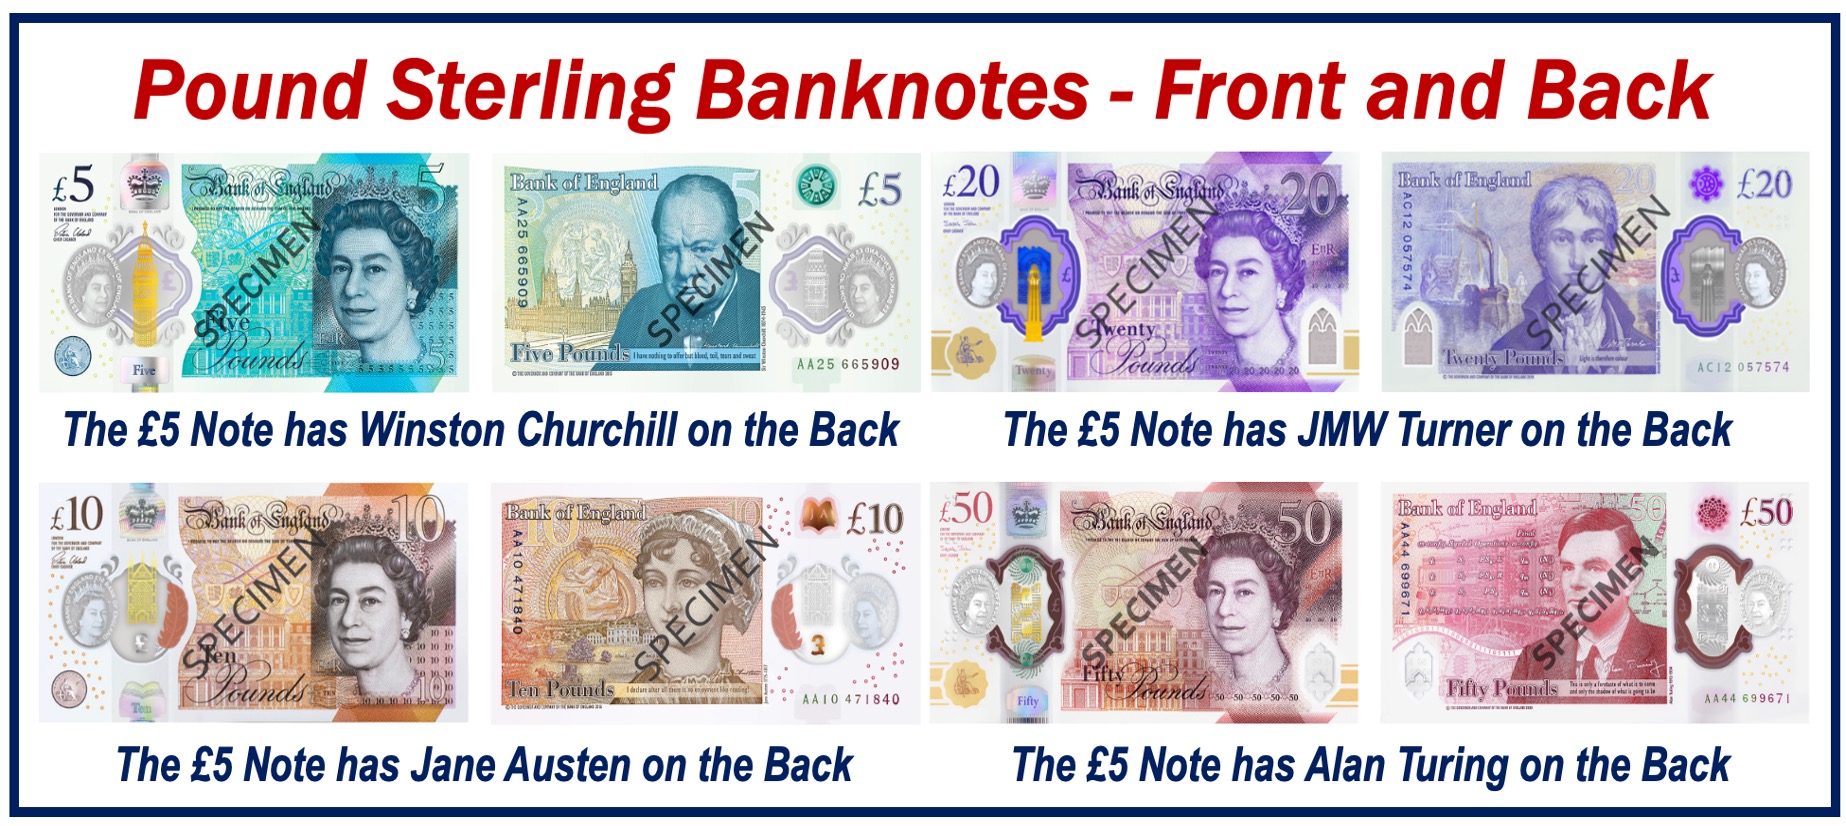 Details about £5, £10, £20, and £50 pound banknote denominations.